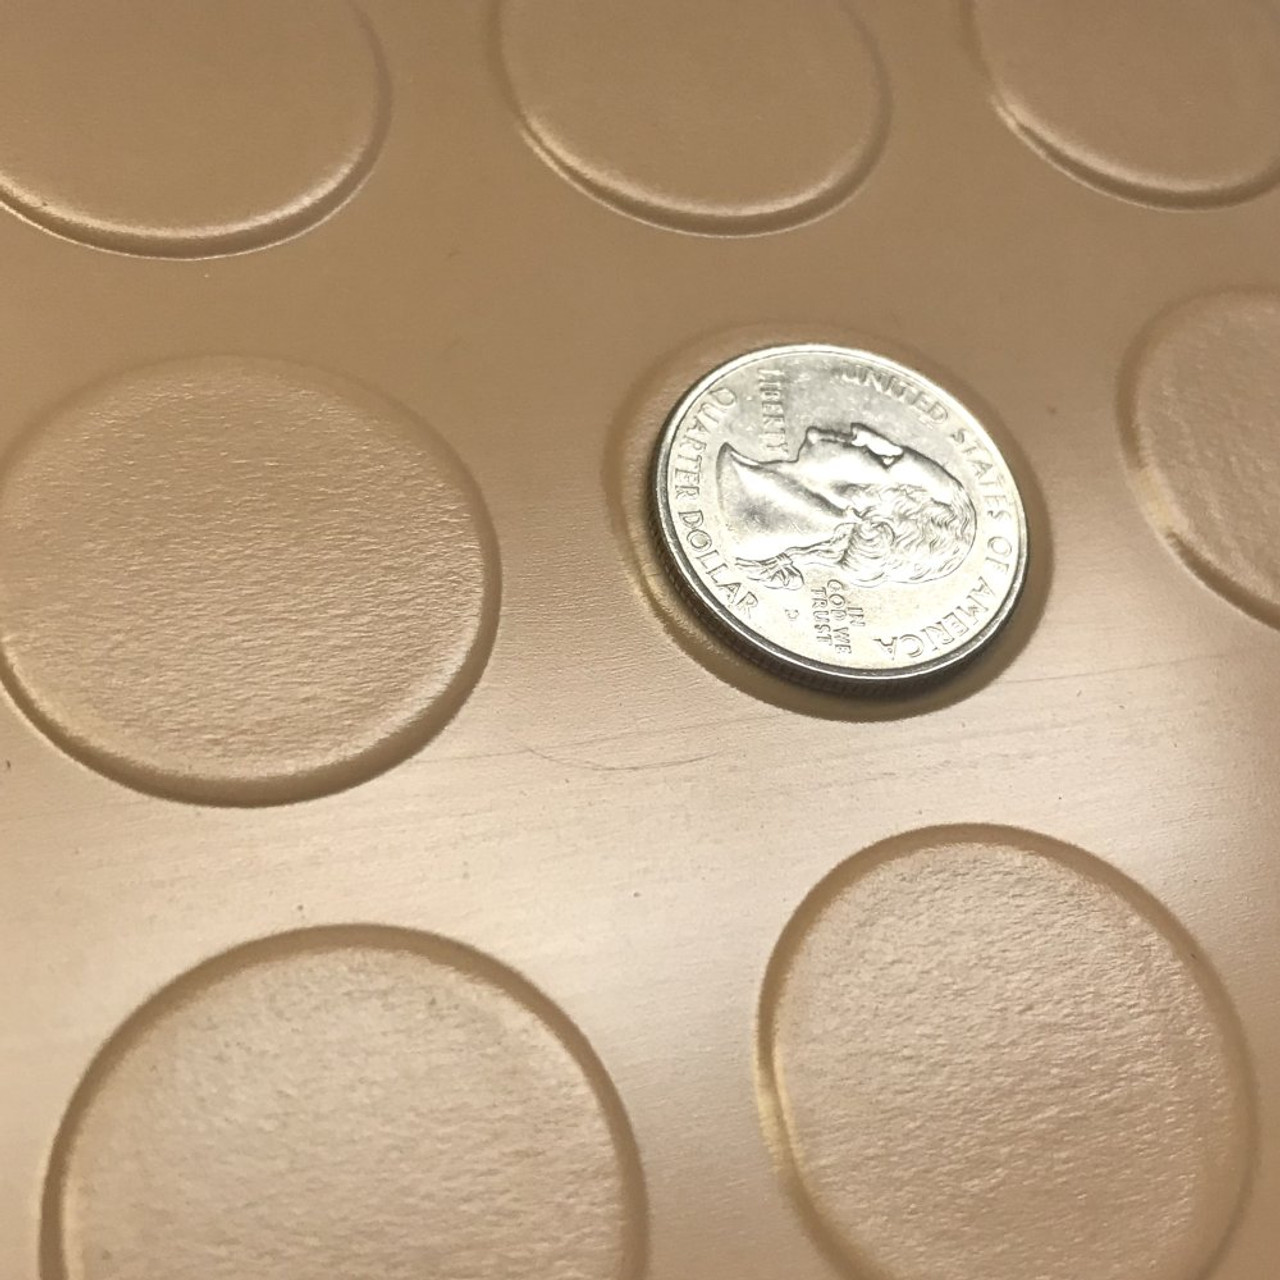 G Floor Coin Pattern is about the size of a quarter.